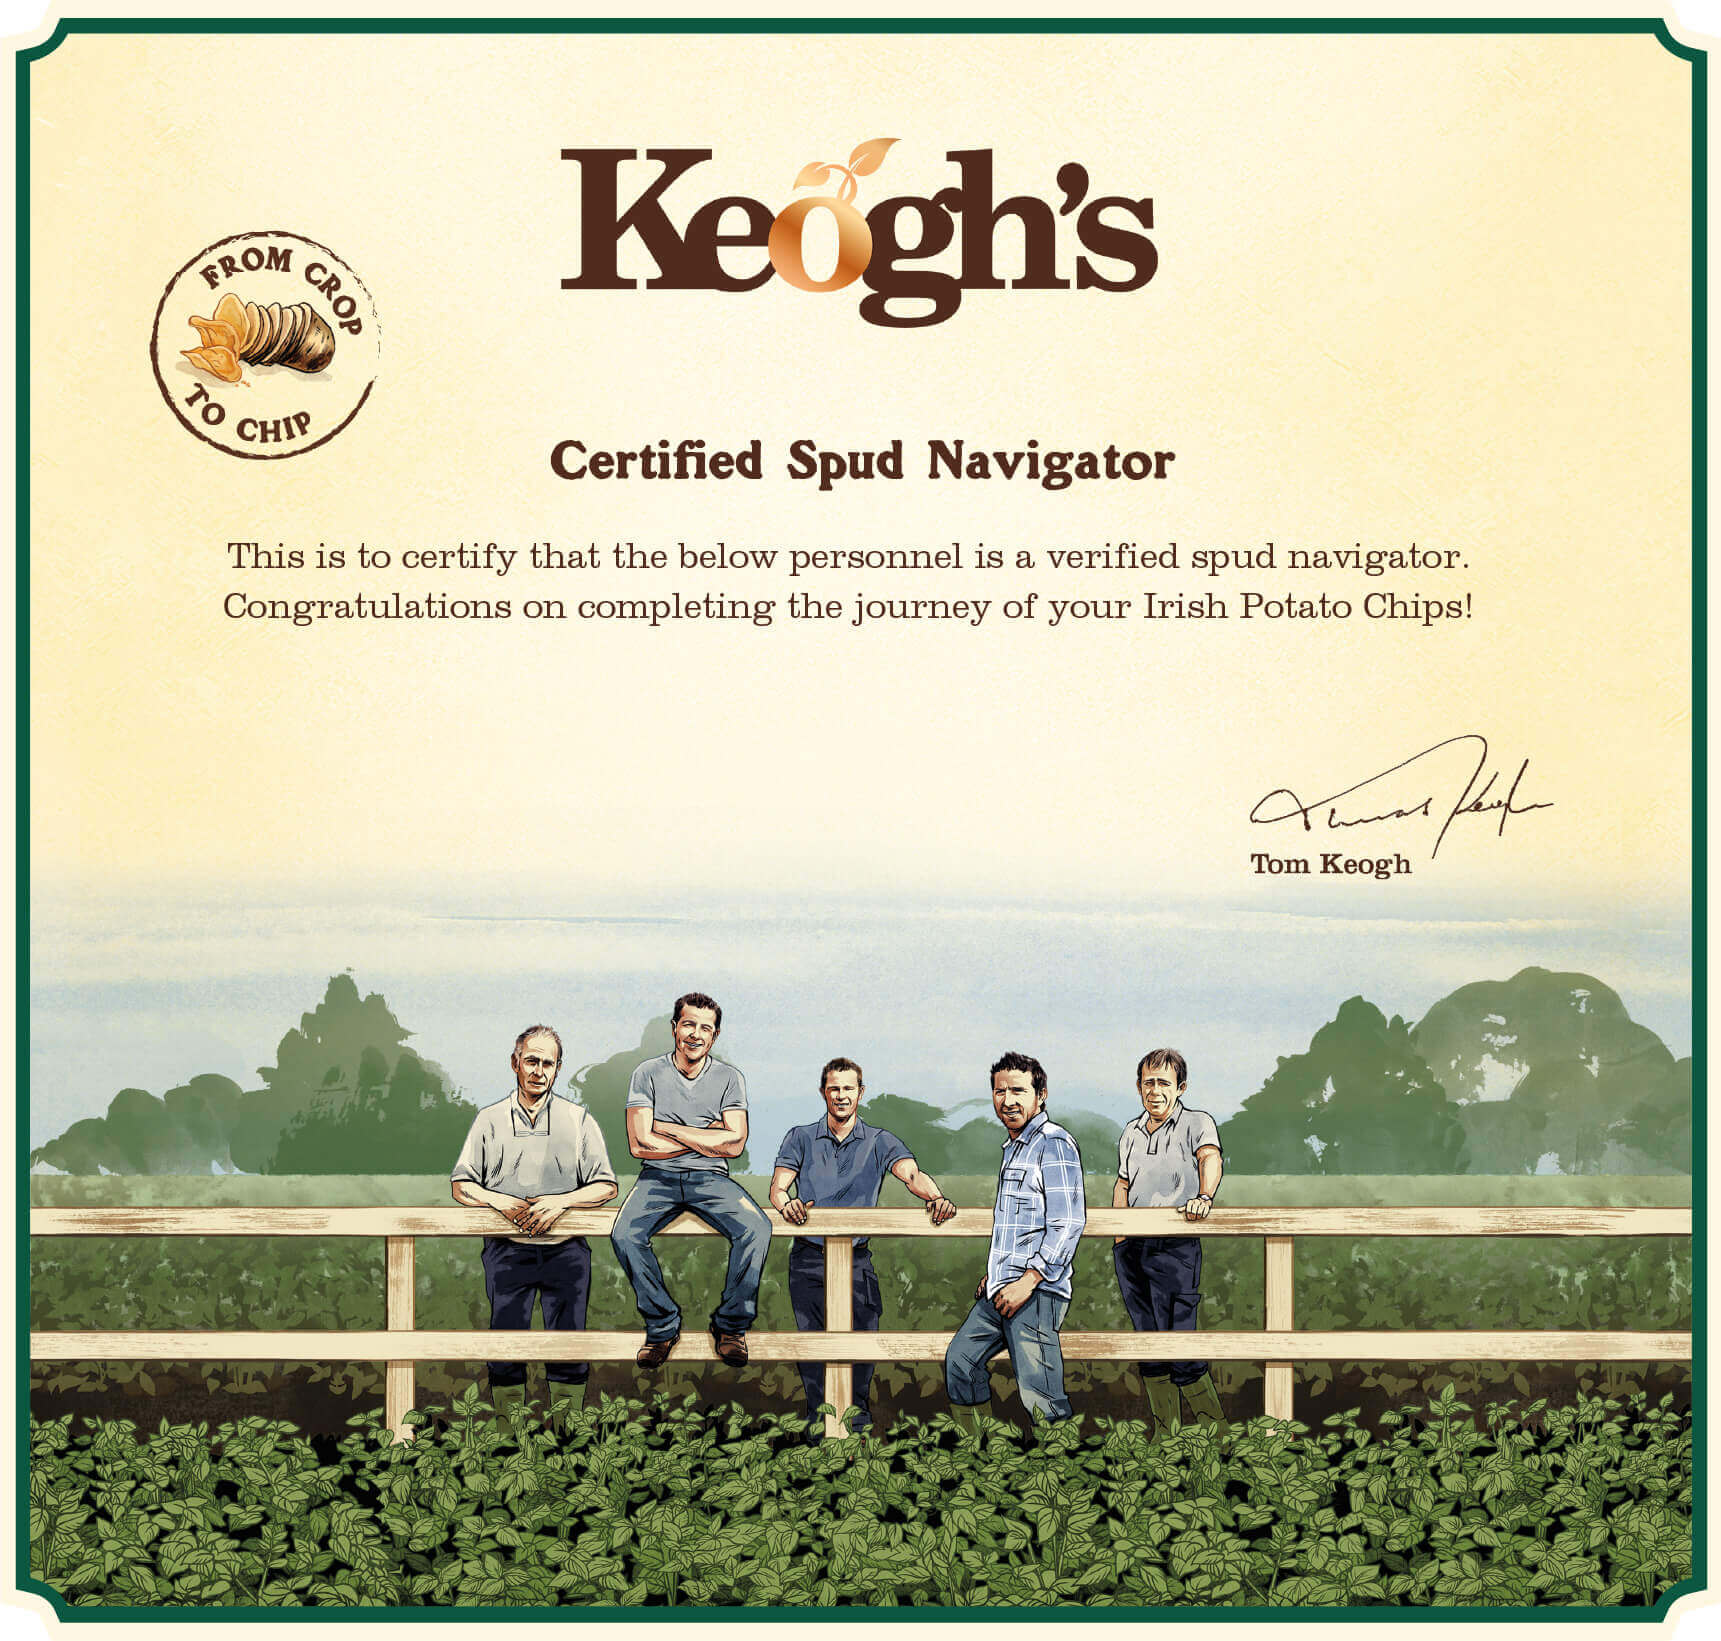 Keogh's Certificate Background Image